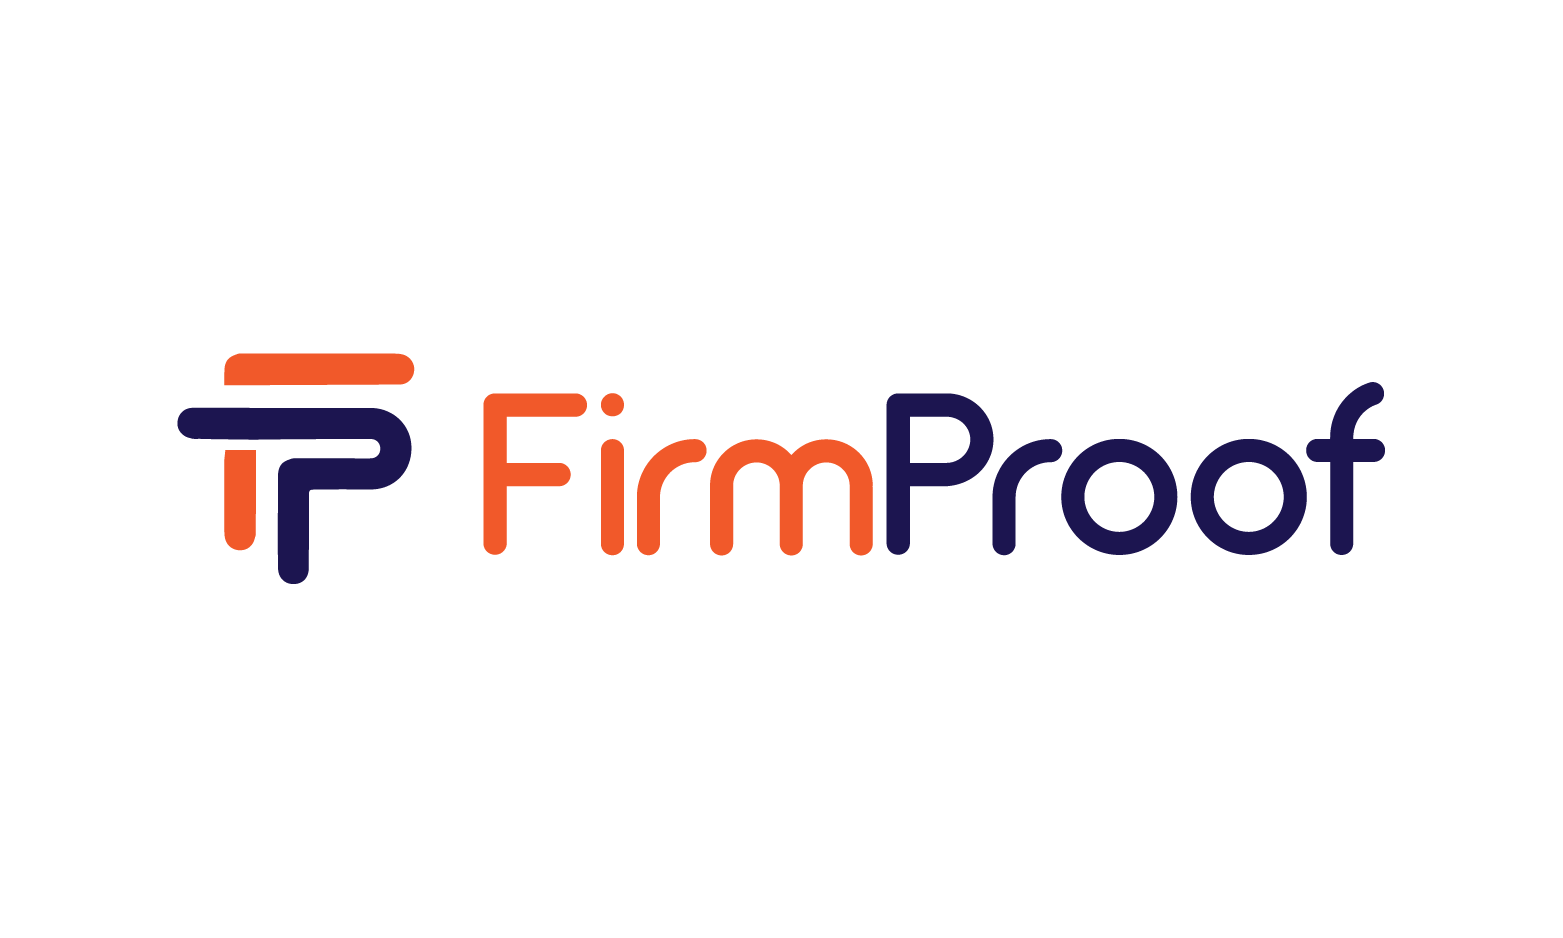 FirmProof.com - Creative brandable domain for sale